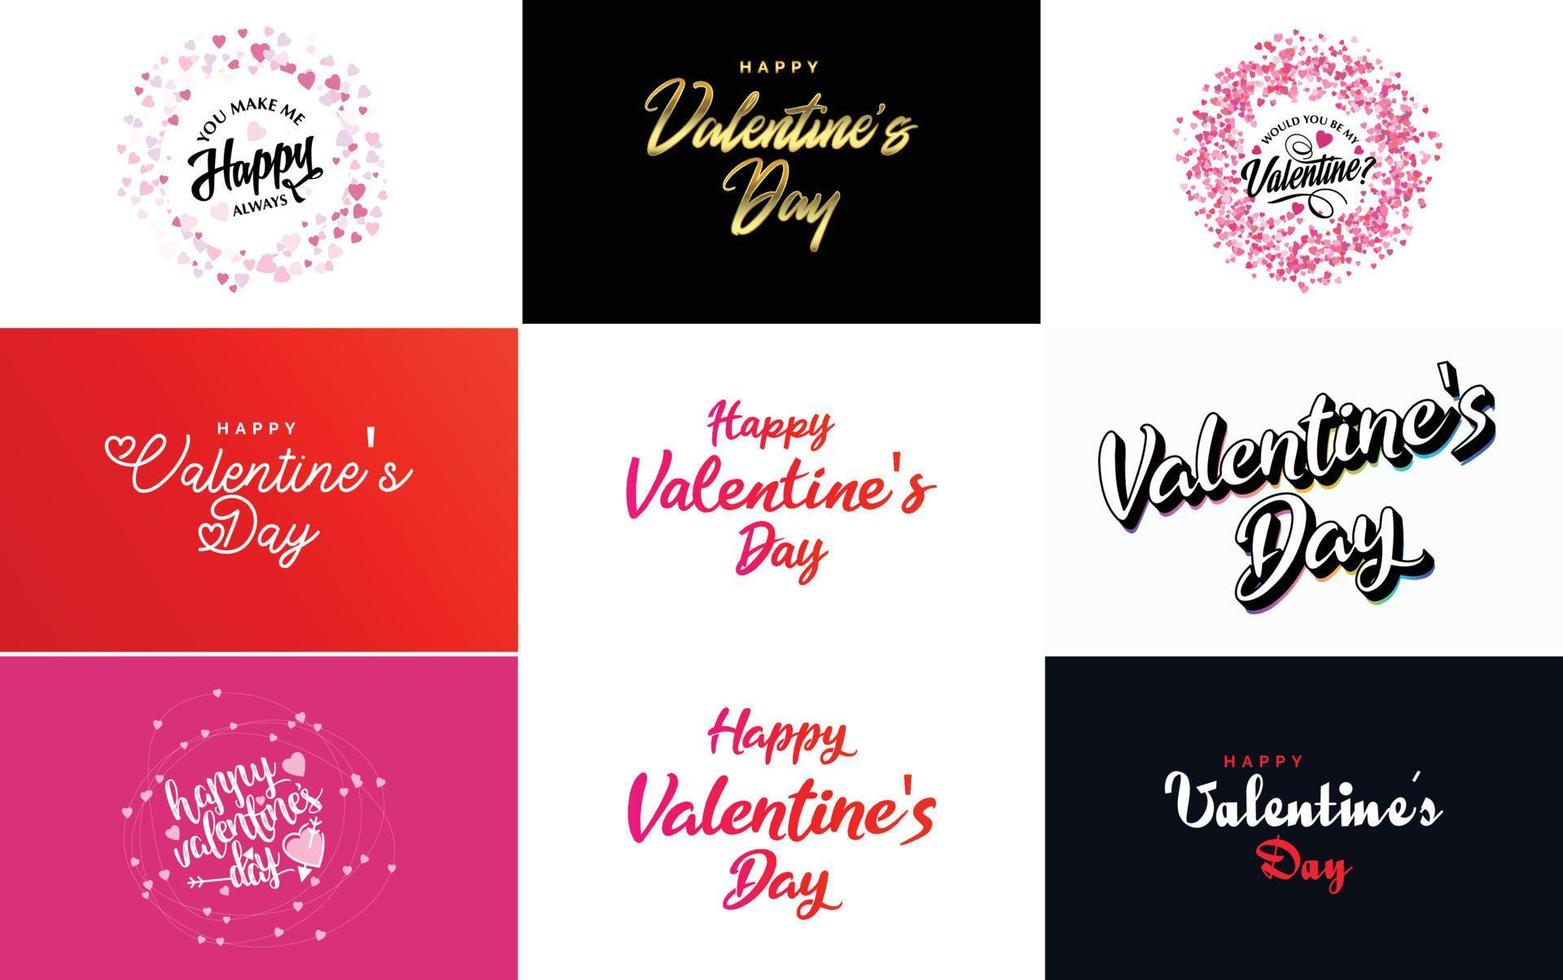 Happy Valentine's Day banner template with a romantic theme and a pink and red color scheme vector